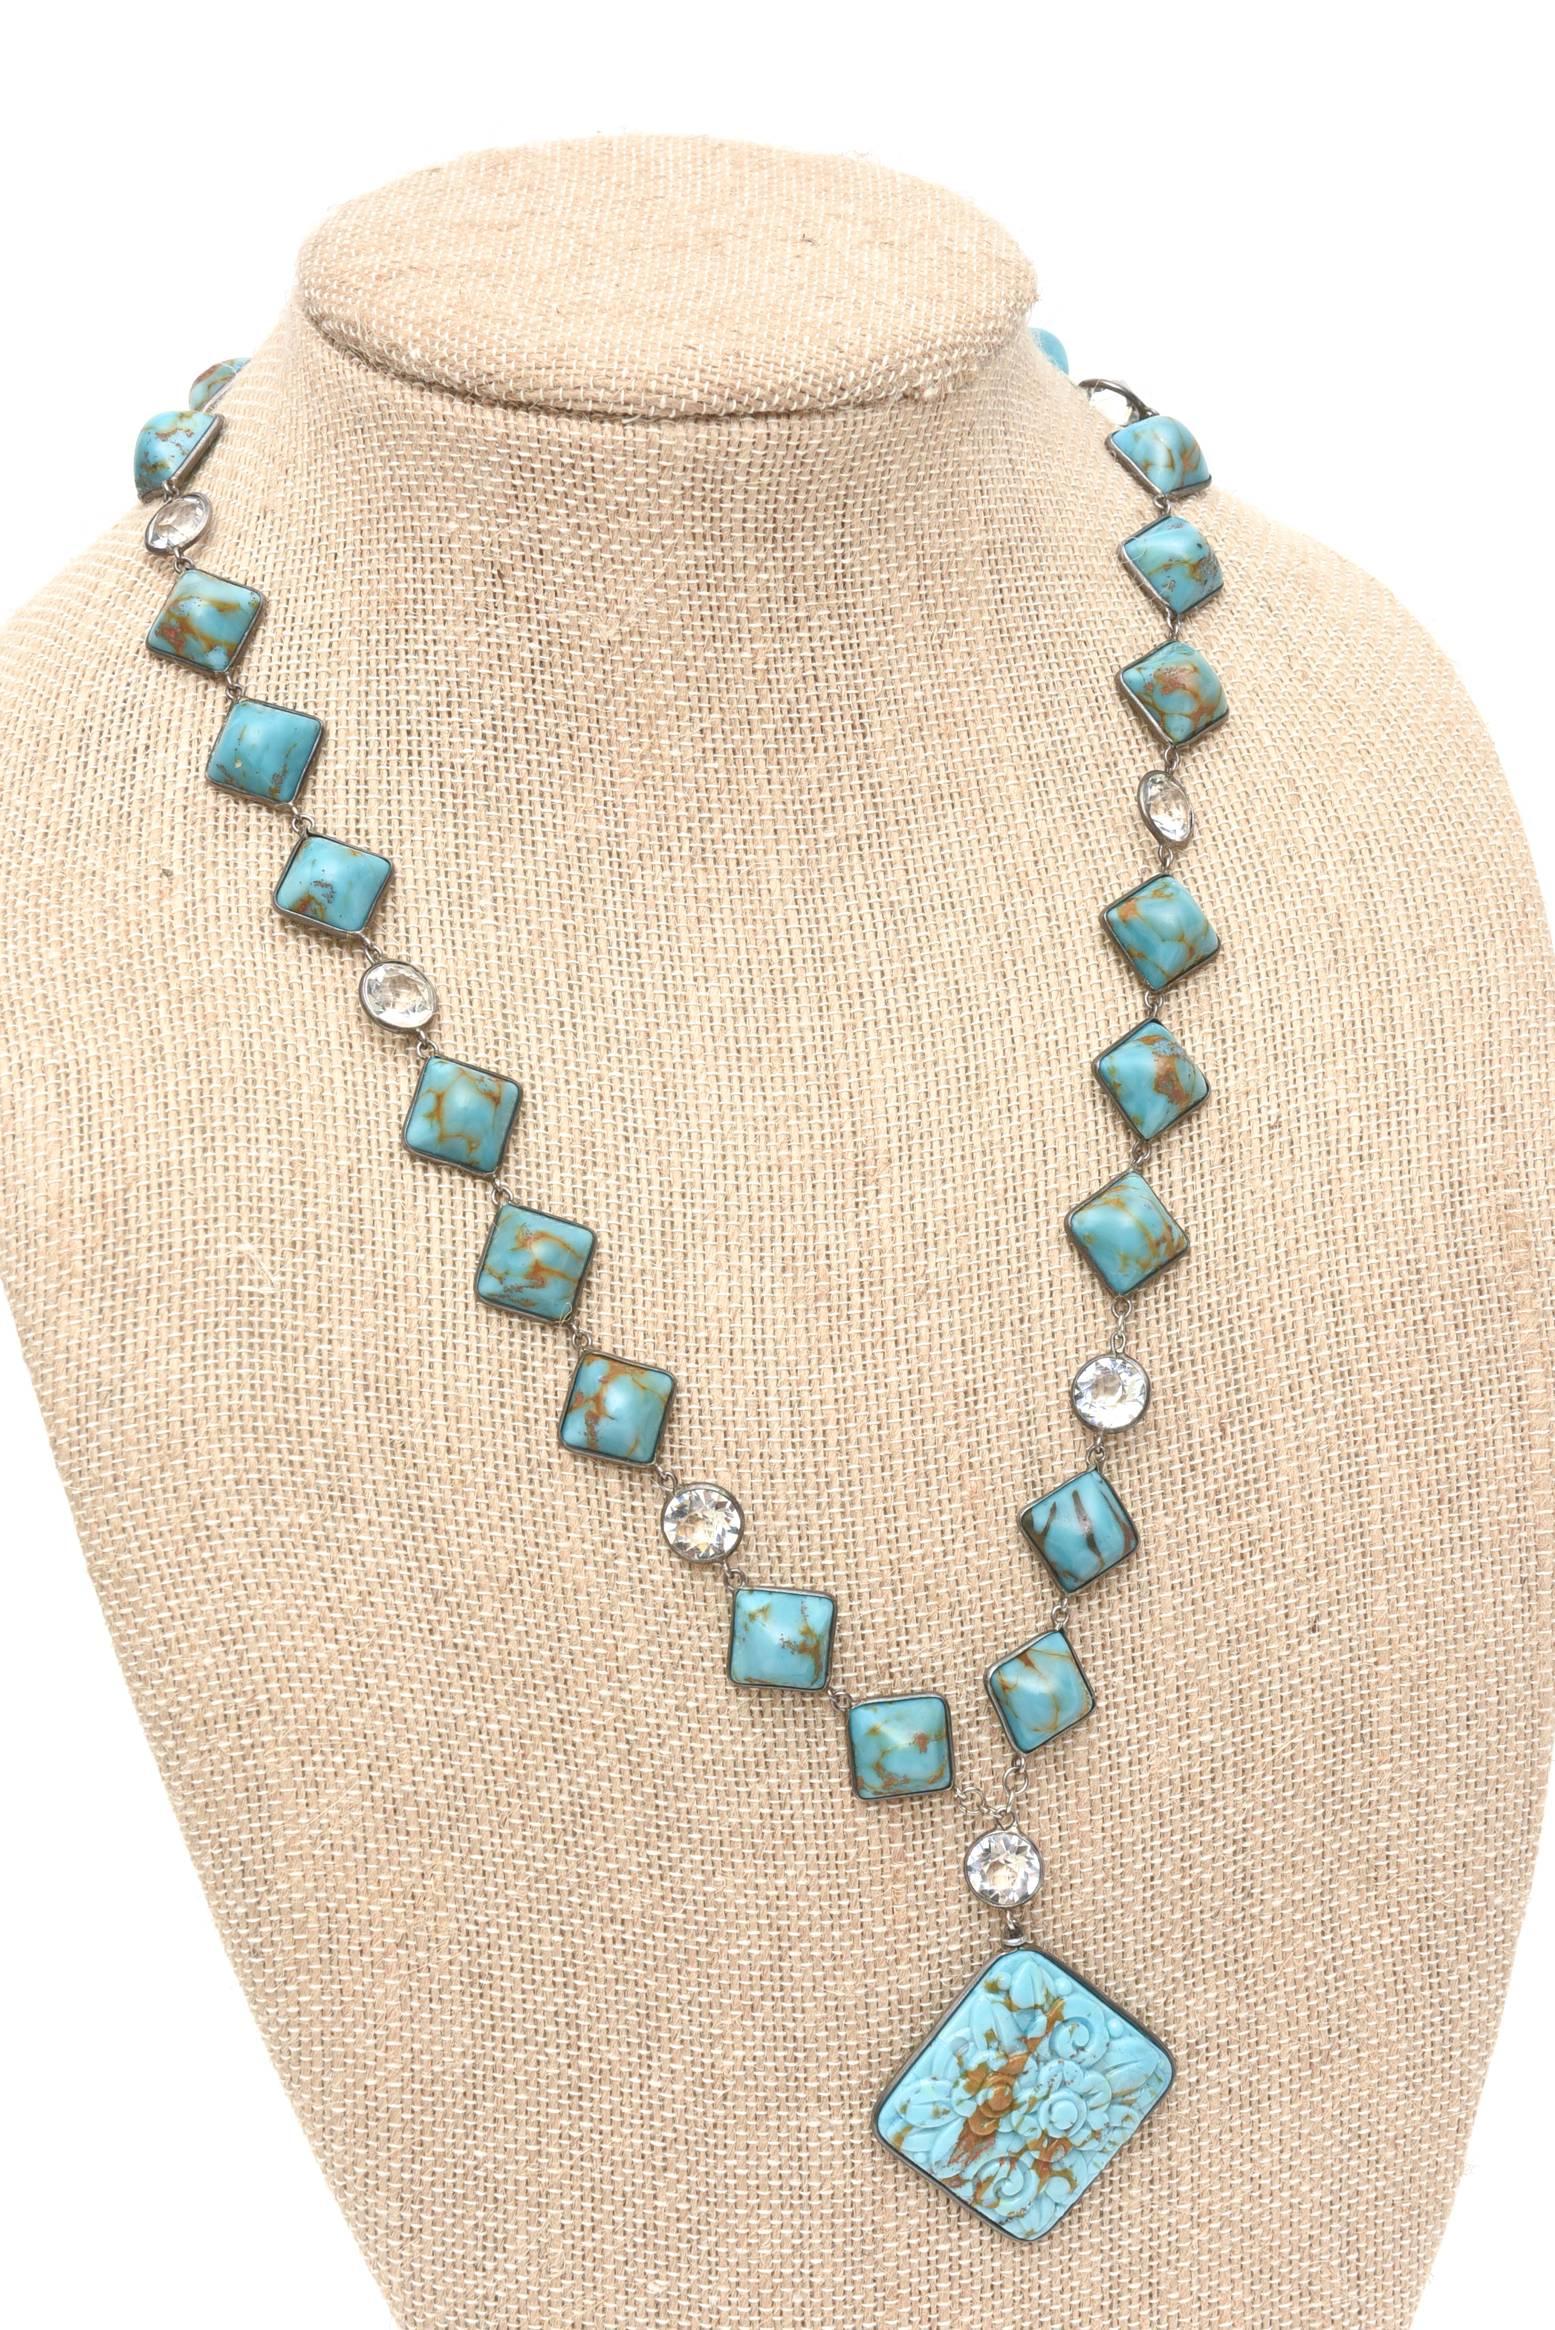 Diamond Shaped Turquoise & Faceted Crystal Pendant Long Necklace 5